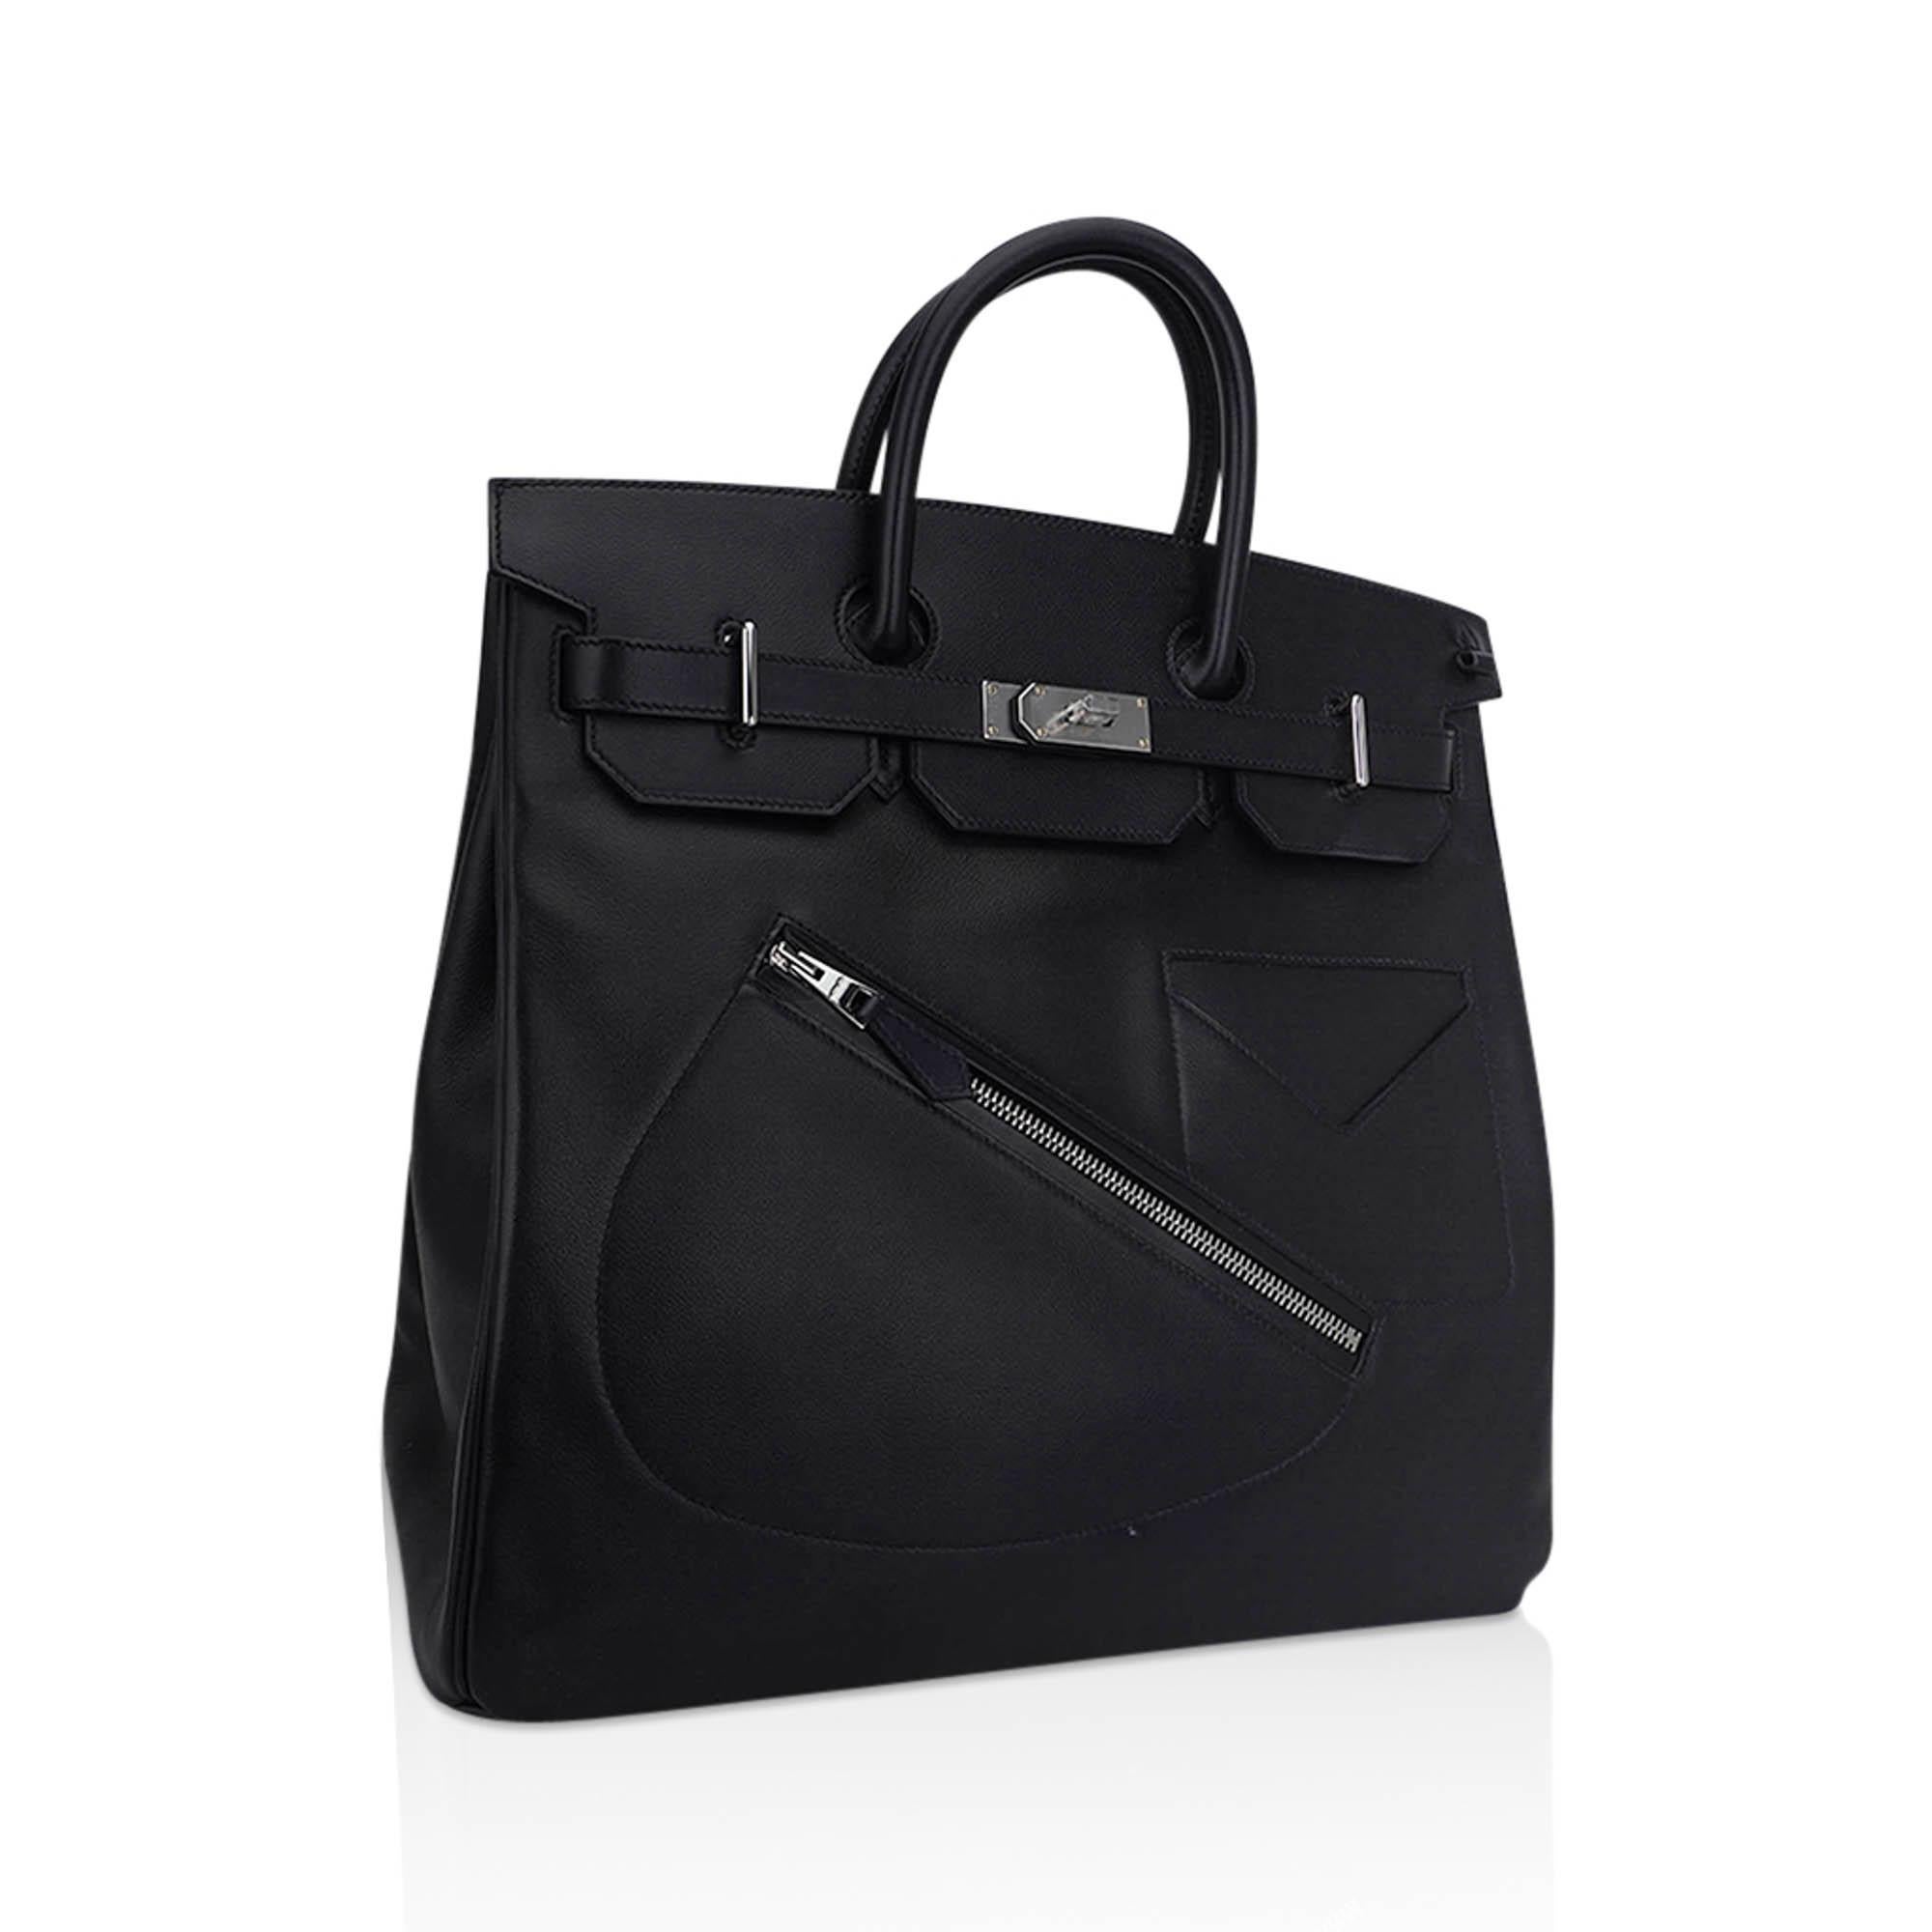 Mightychic offers an Hermes limited edition HAC Rock Birkin 40 (Haut a Courroies) bag featured in Black and Volupto leather.
The bag features a diagonal saddle shaped zippered pocket in front, tonal stitching and double rolled handles.
Inside the